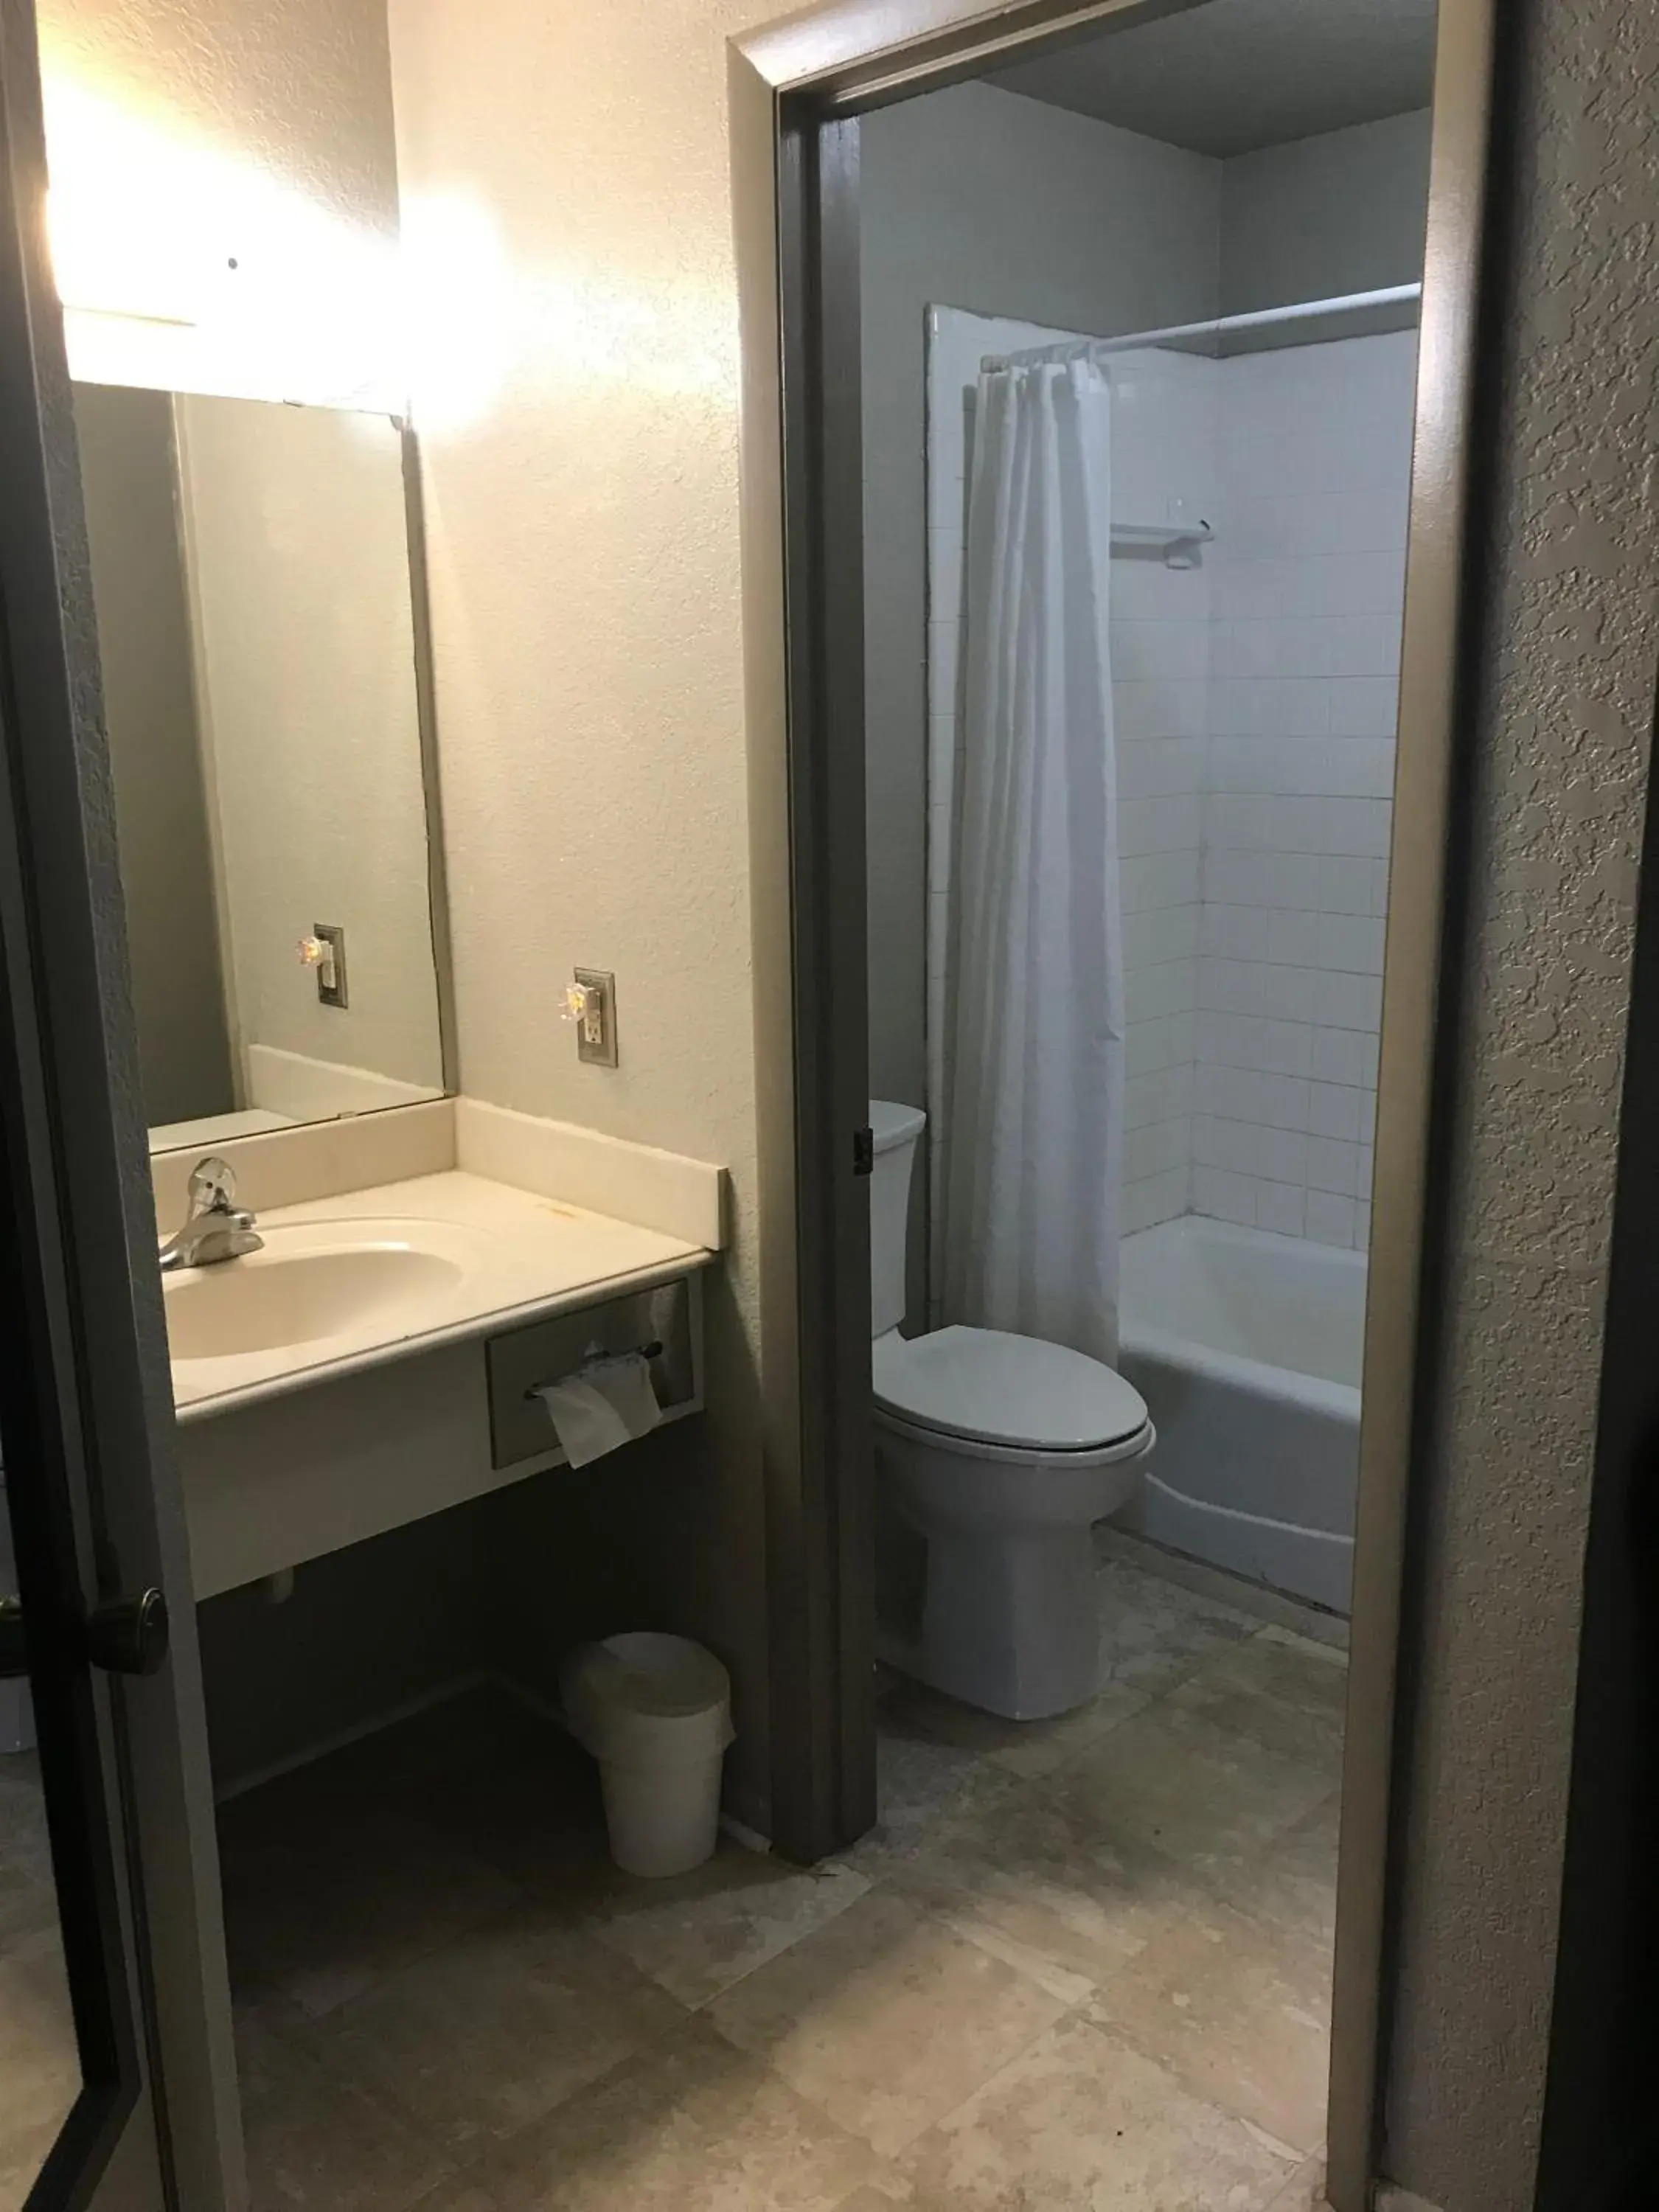 Bathroom in Sunset Inn and Suites